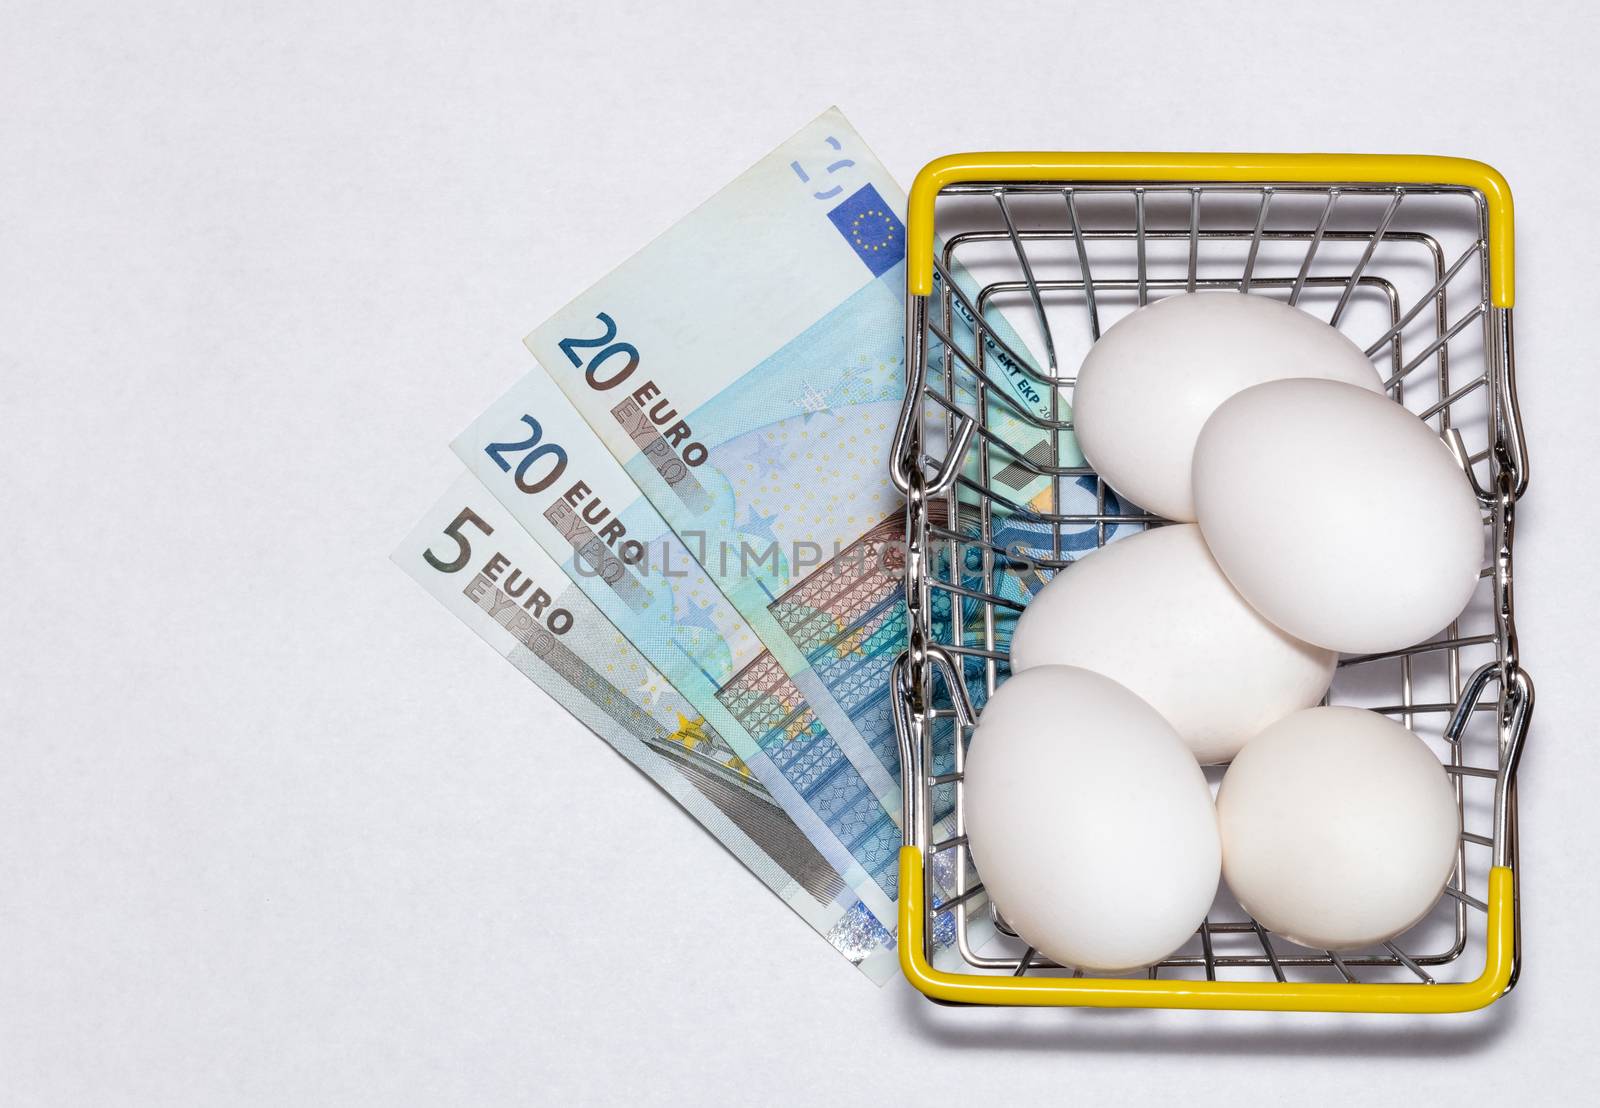 Fresh eggs in a shopping cart with various euro bills underneath it. Shopping, purchasing, and food delivery concept. by DamantisZ